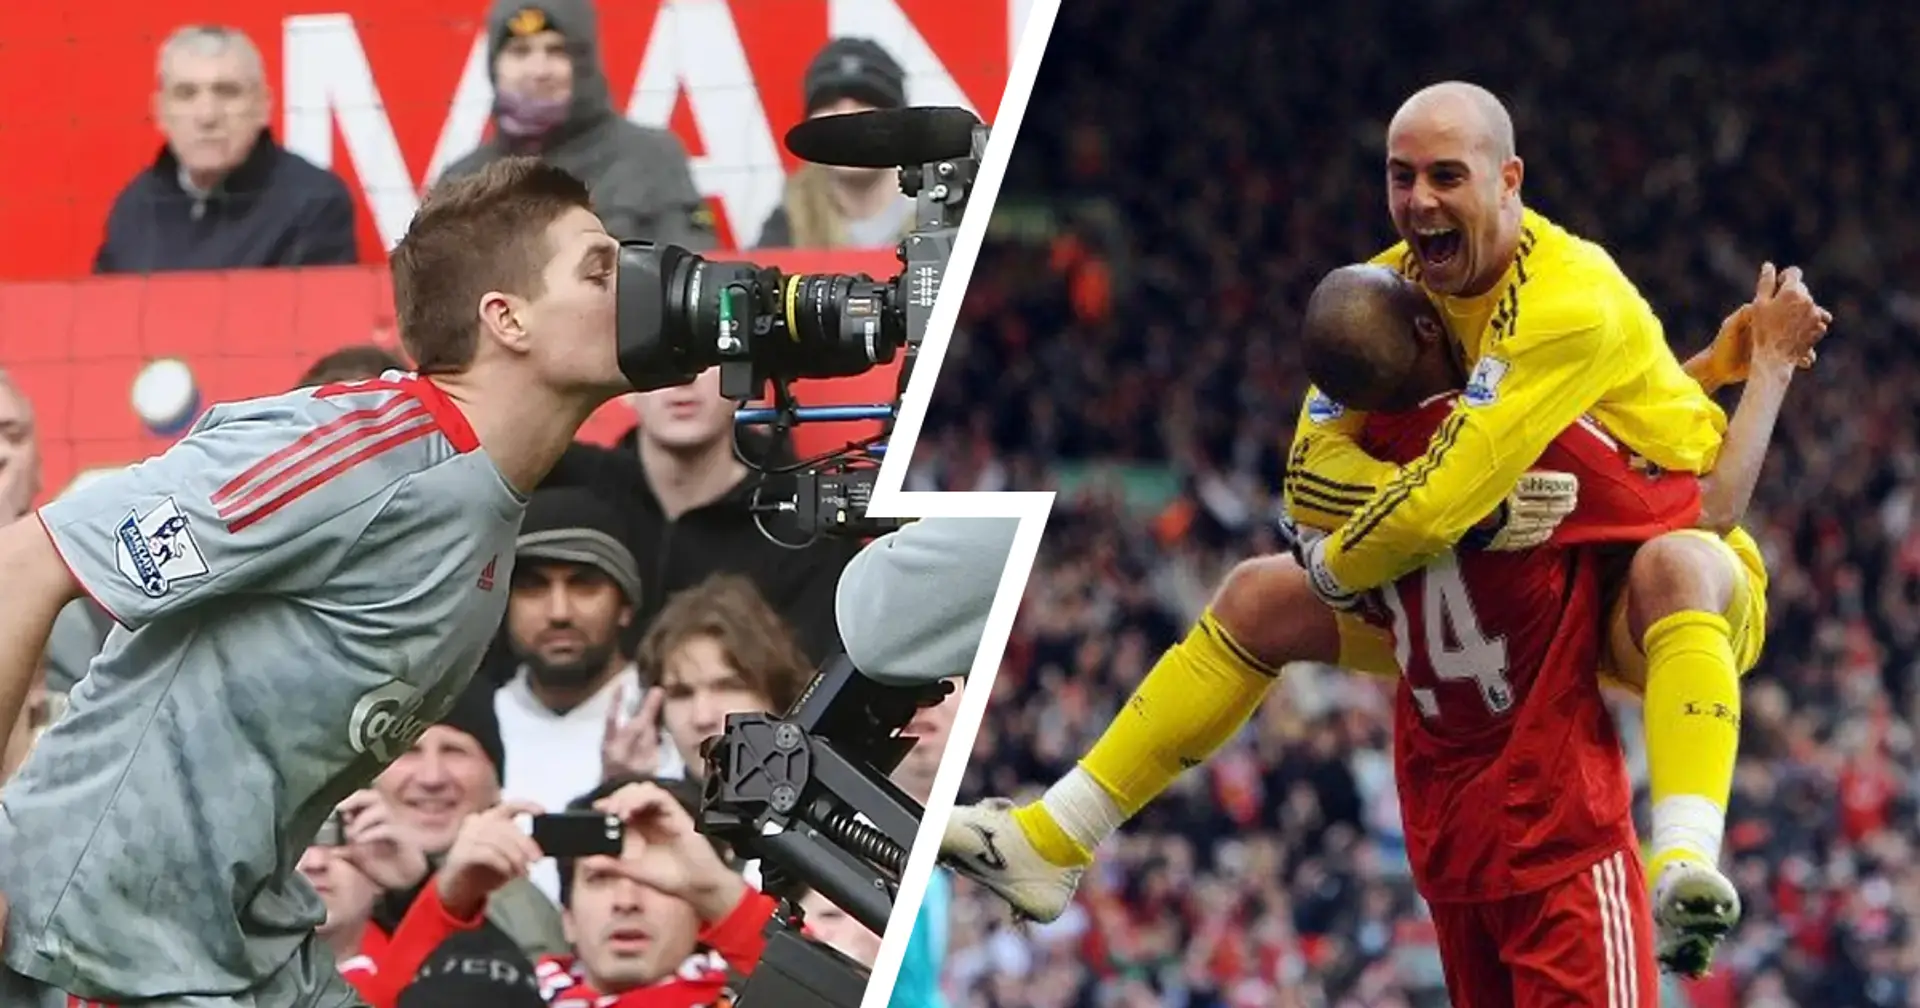 Rivalry for the ages: Highlights from Liverpool's two 2009 wins against Man United ahead of big game (video)